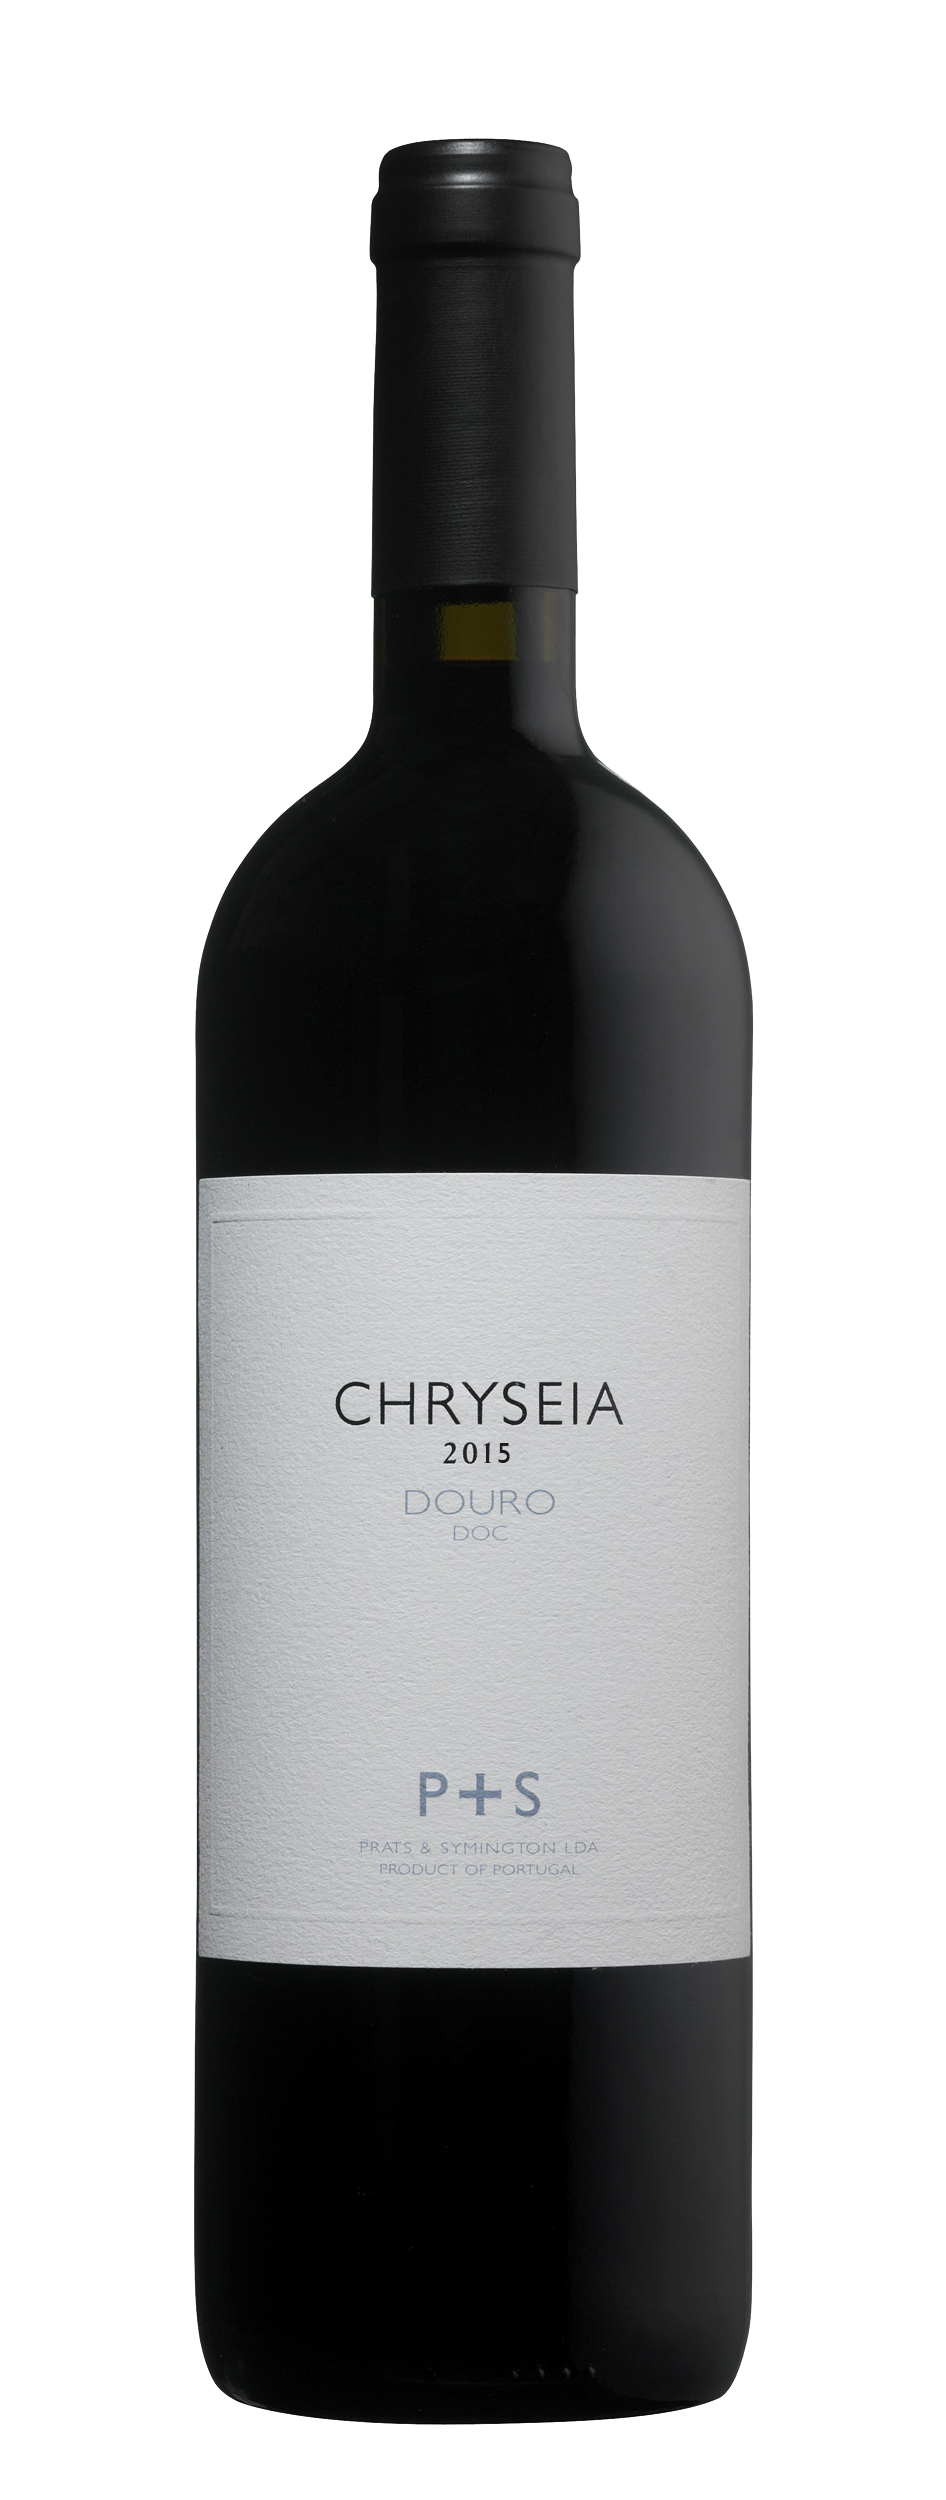 Product Image for P&S CHRYSEIA DOURO RED 2015 - MAGNUM